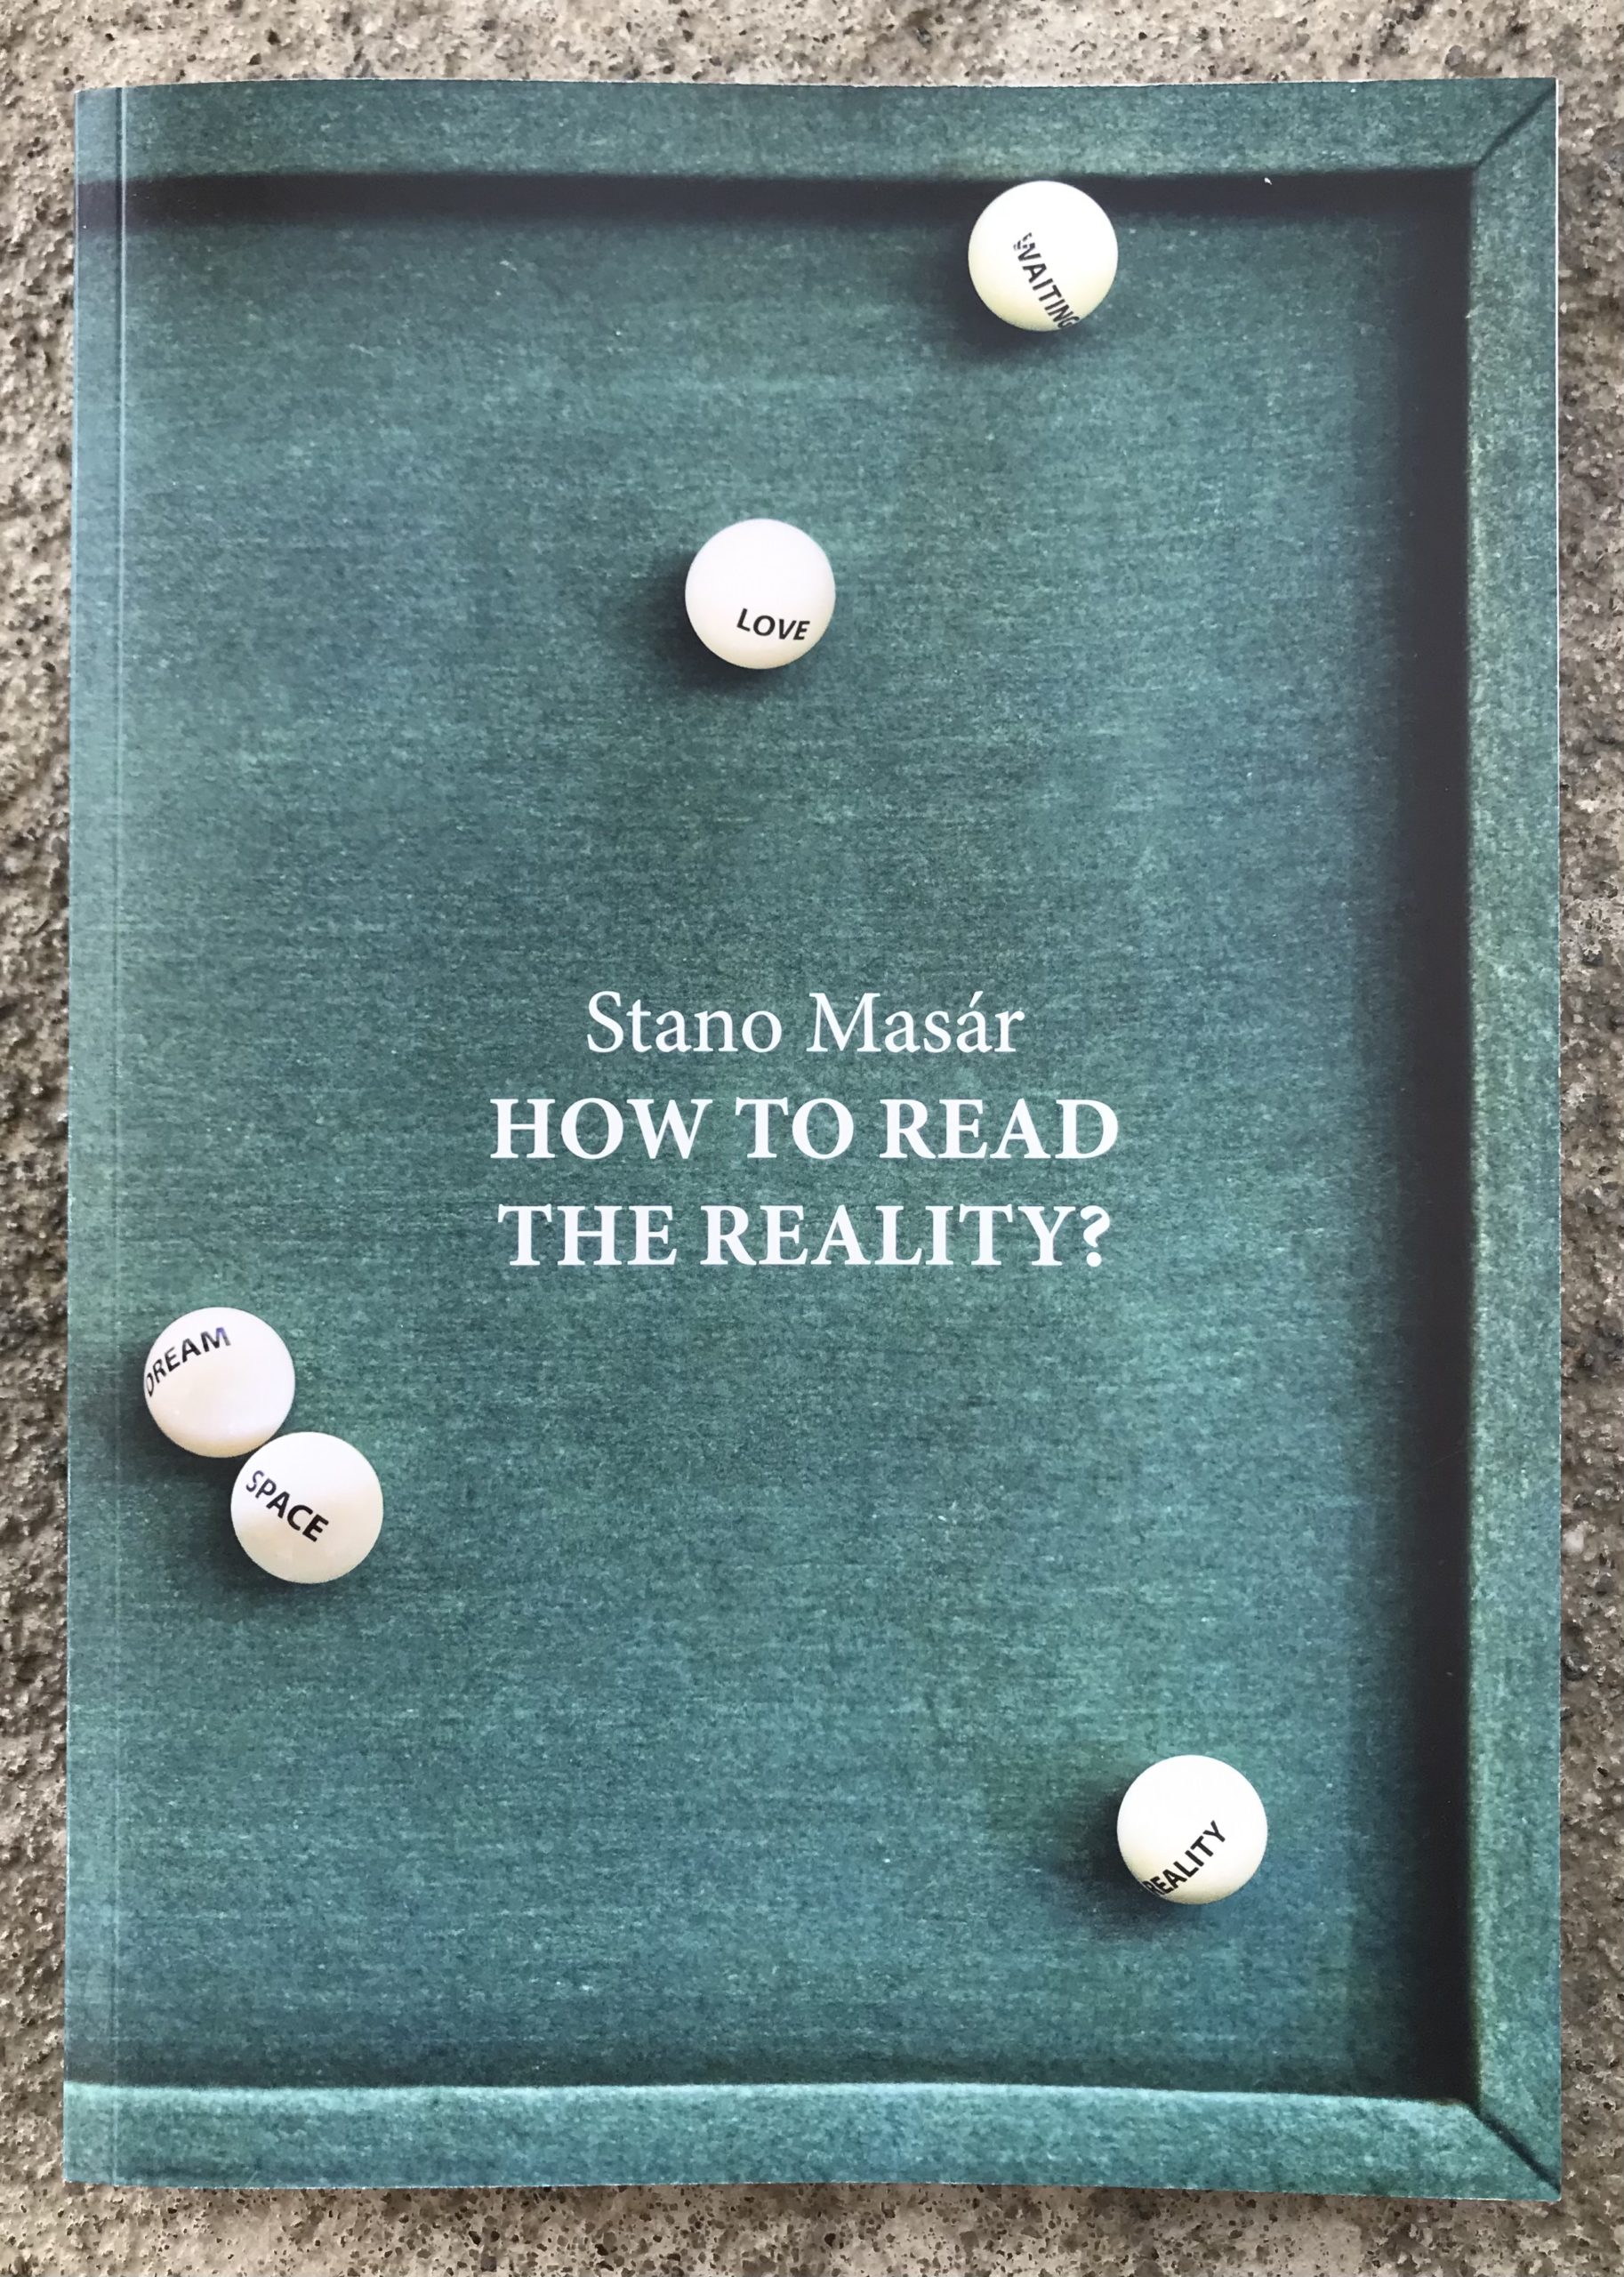 Stano Masár – How to read the reality?